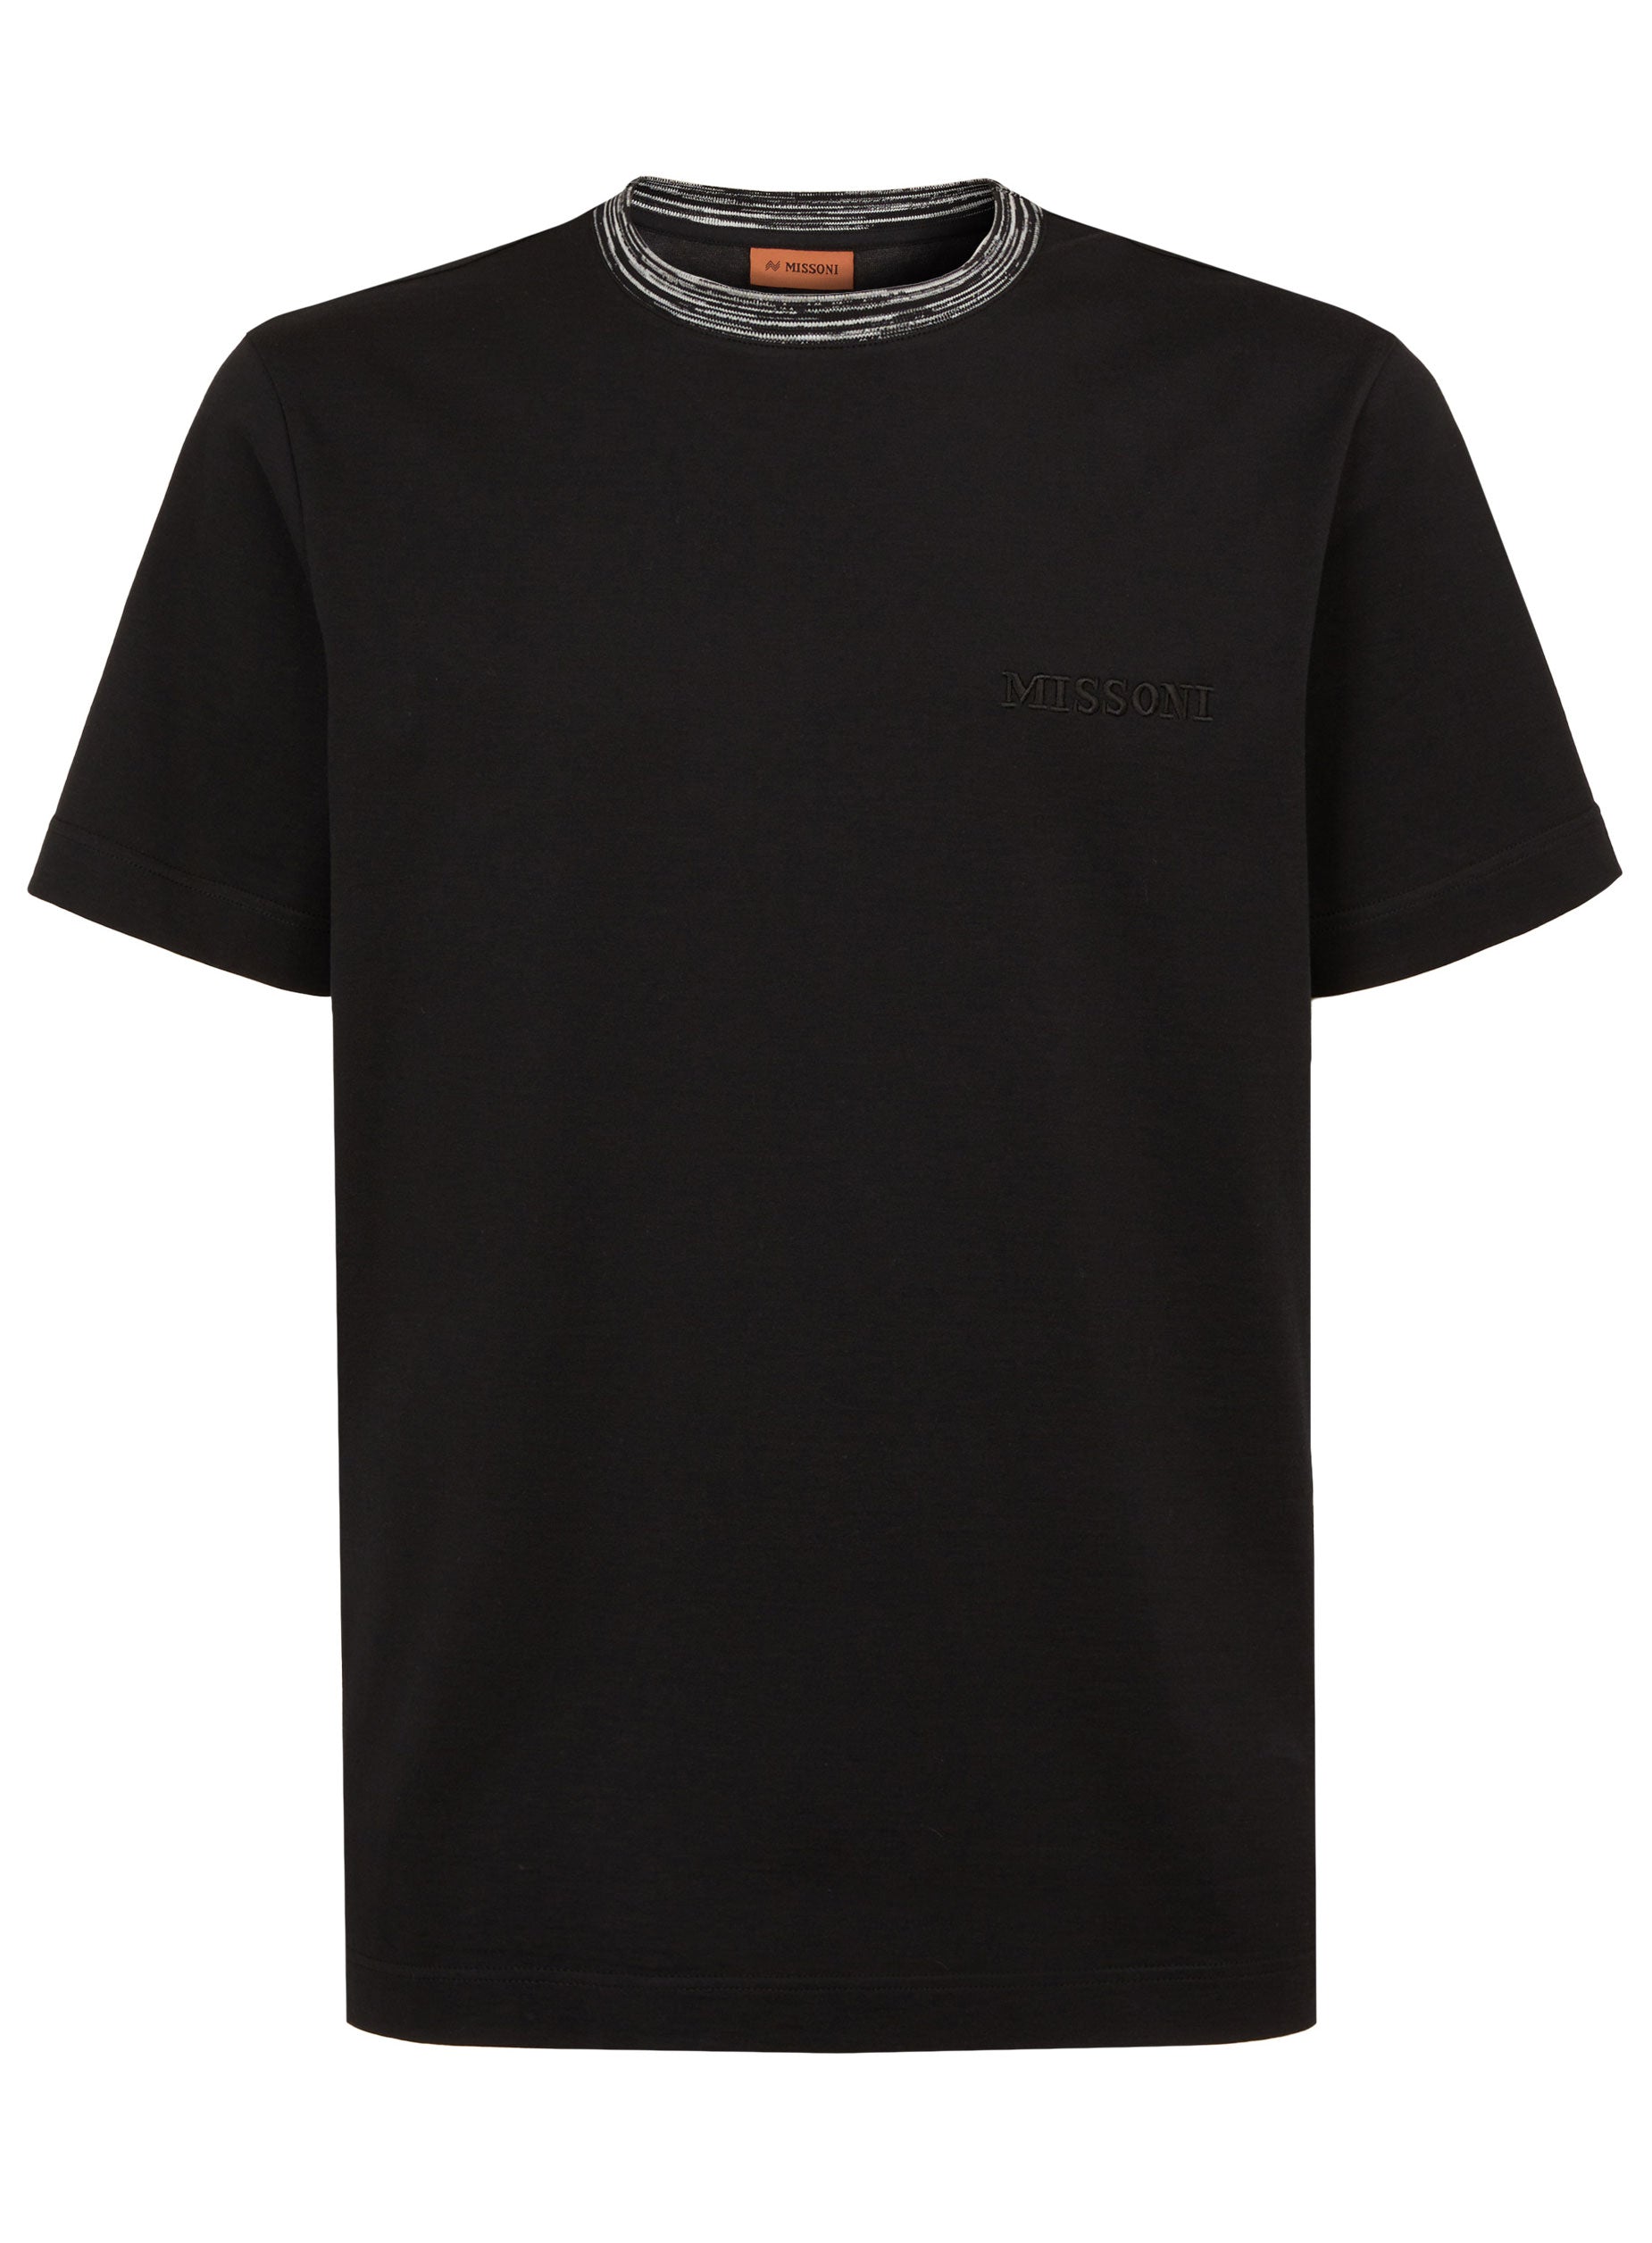 COTTON JERSEY TEE WITH SPACE DYED INSERT - BLACK